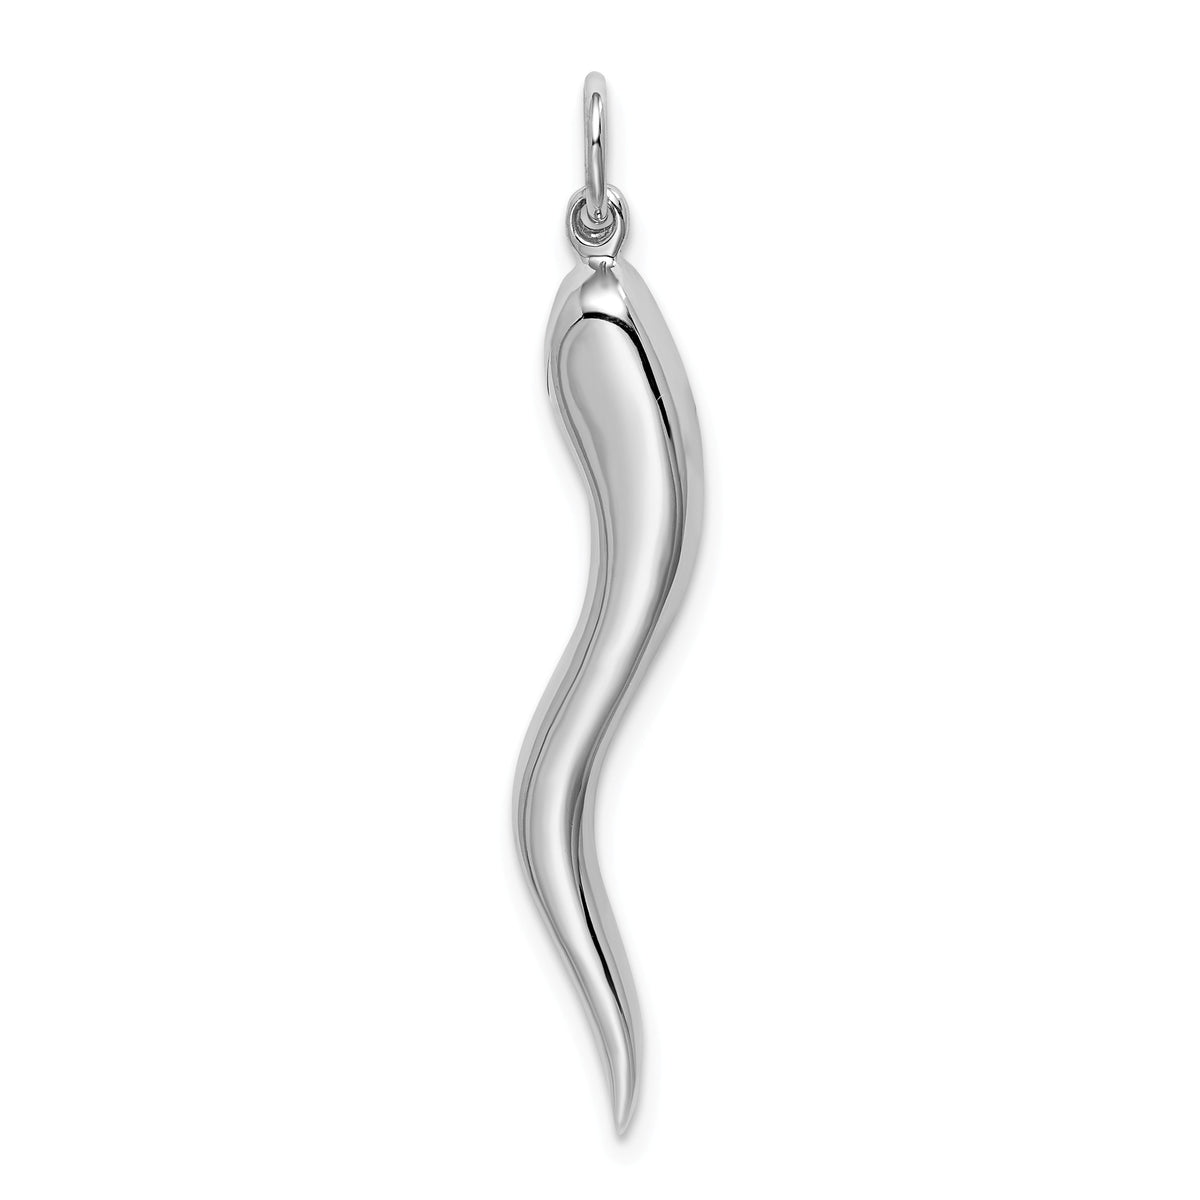 Alternate view of the 14k White Gold Solid Large Italian Horn Pendant, 5 x 40mm by The Black Bow Jewelry Co.